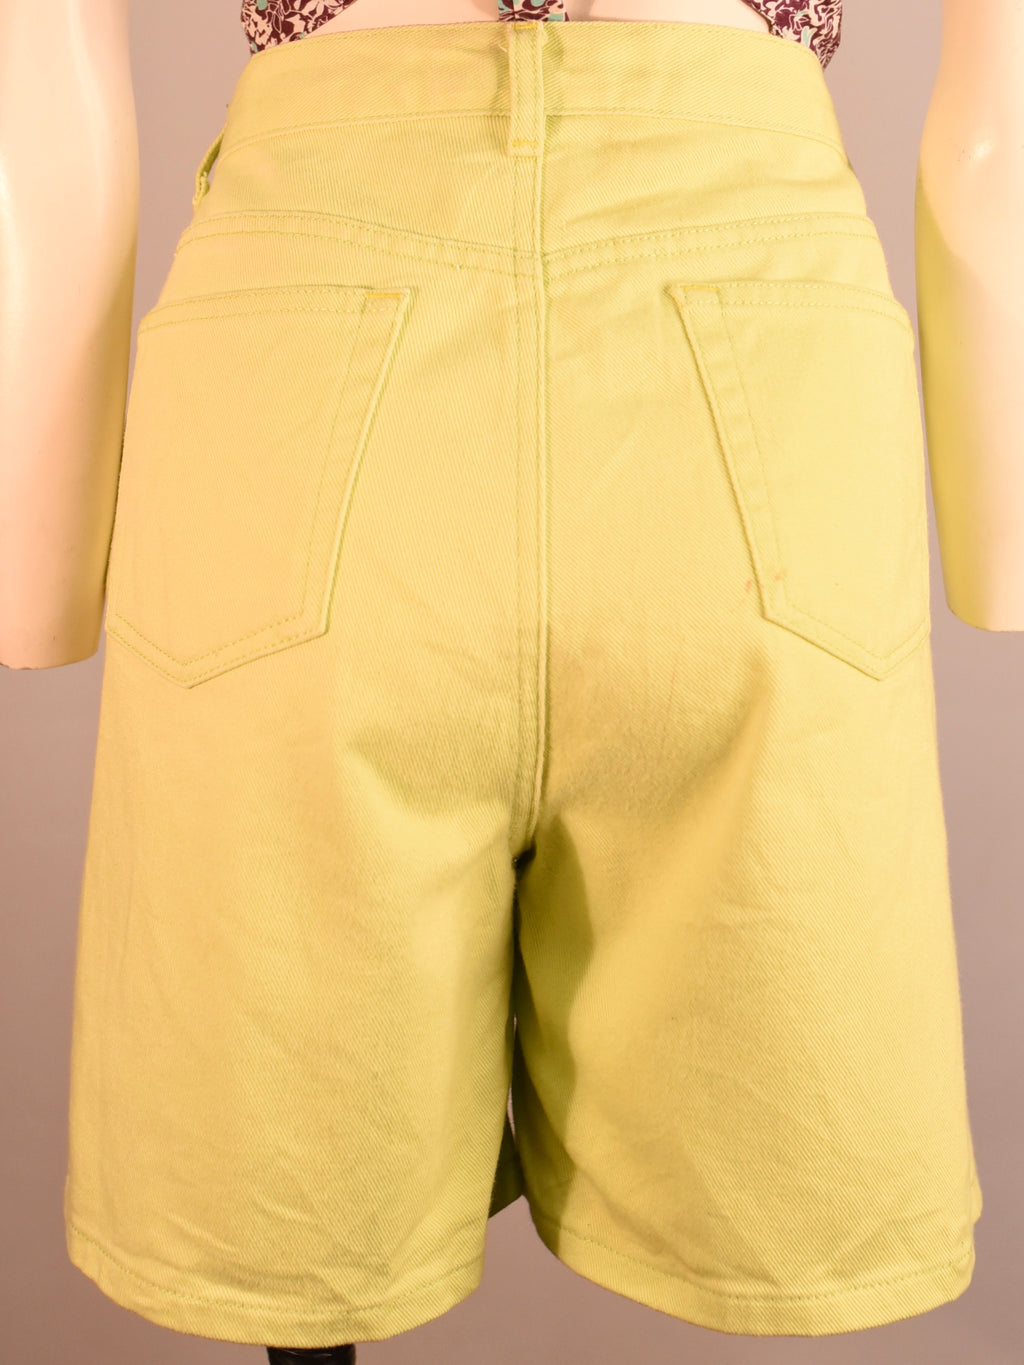 Lime Splice Shorts - AS IS - mark